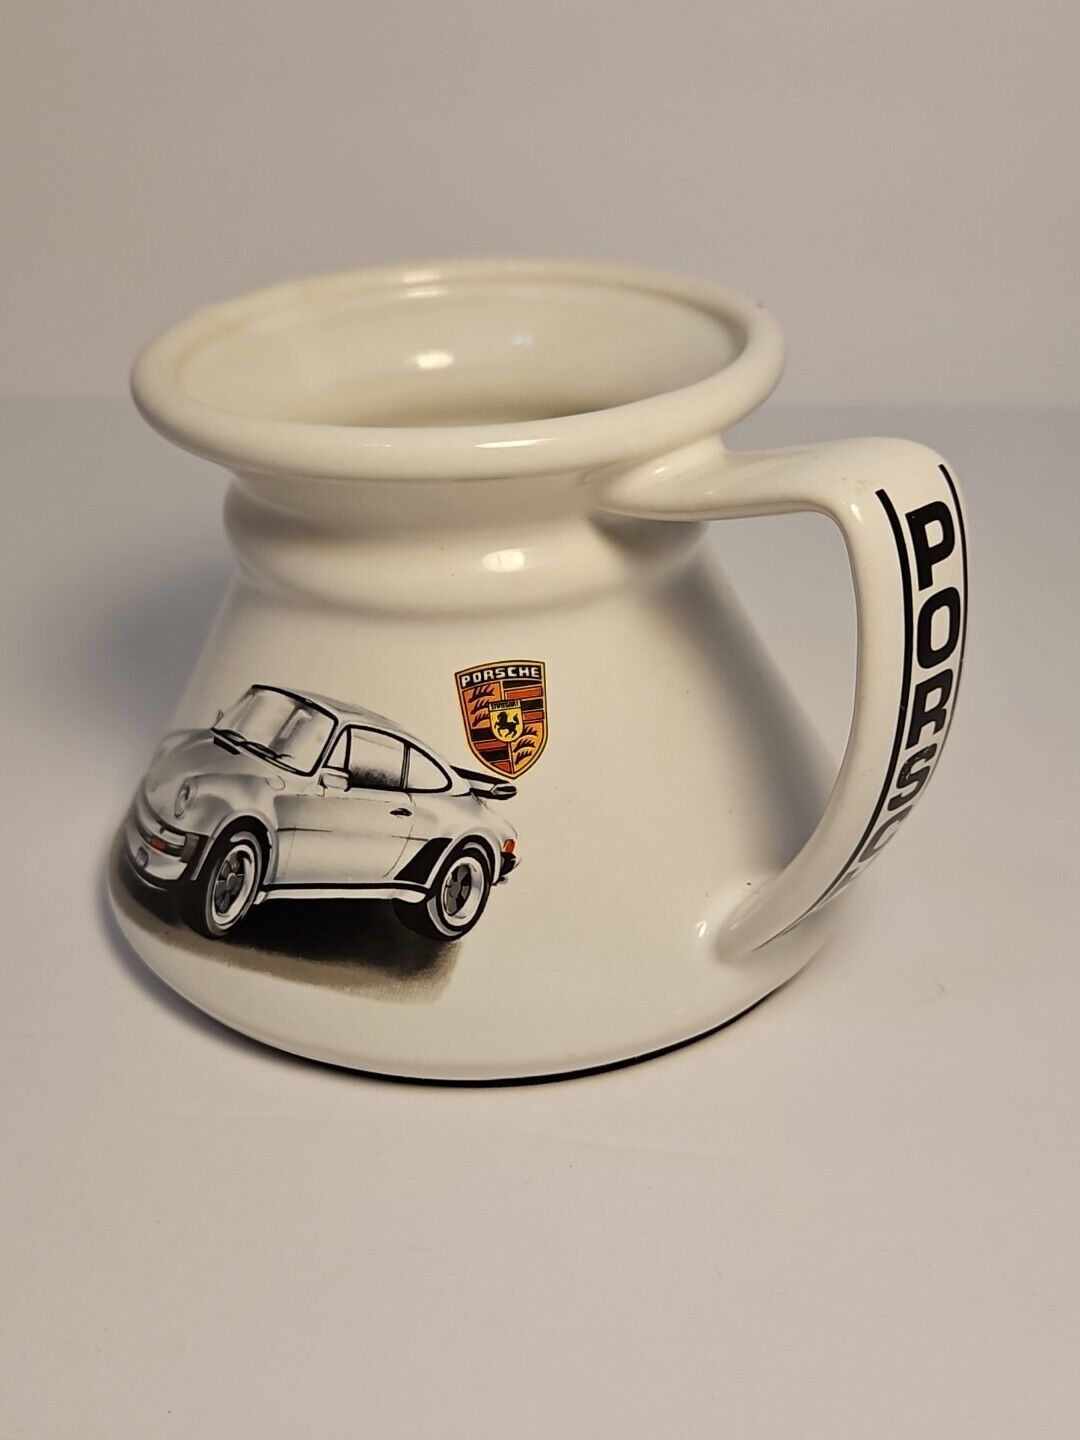 Vintage Coffee Mug Porsche Car Cup Spill Proof Gray White Travel Spelled Out